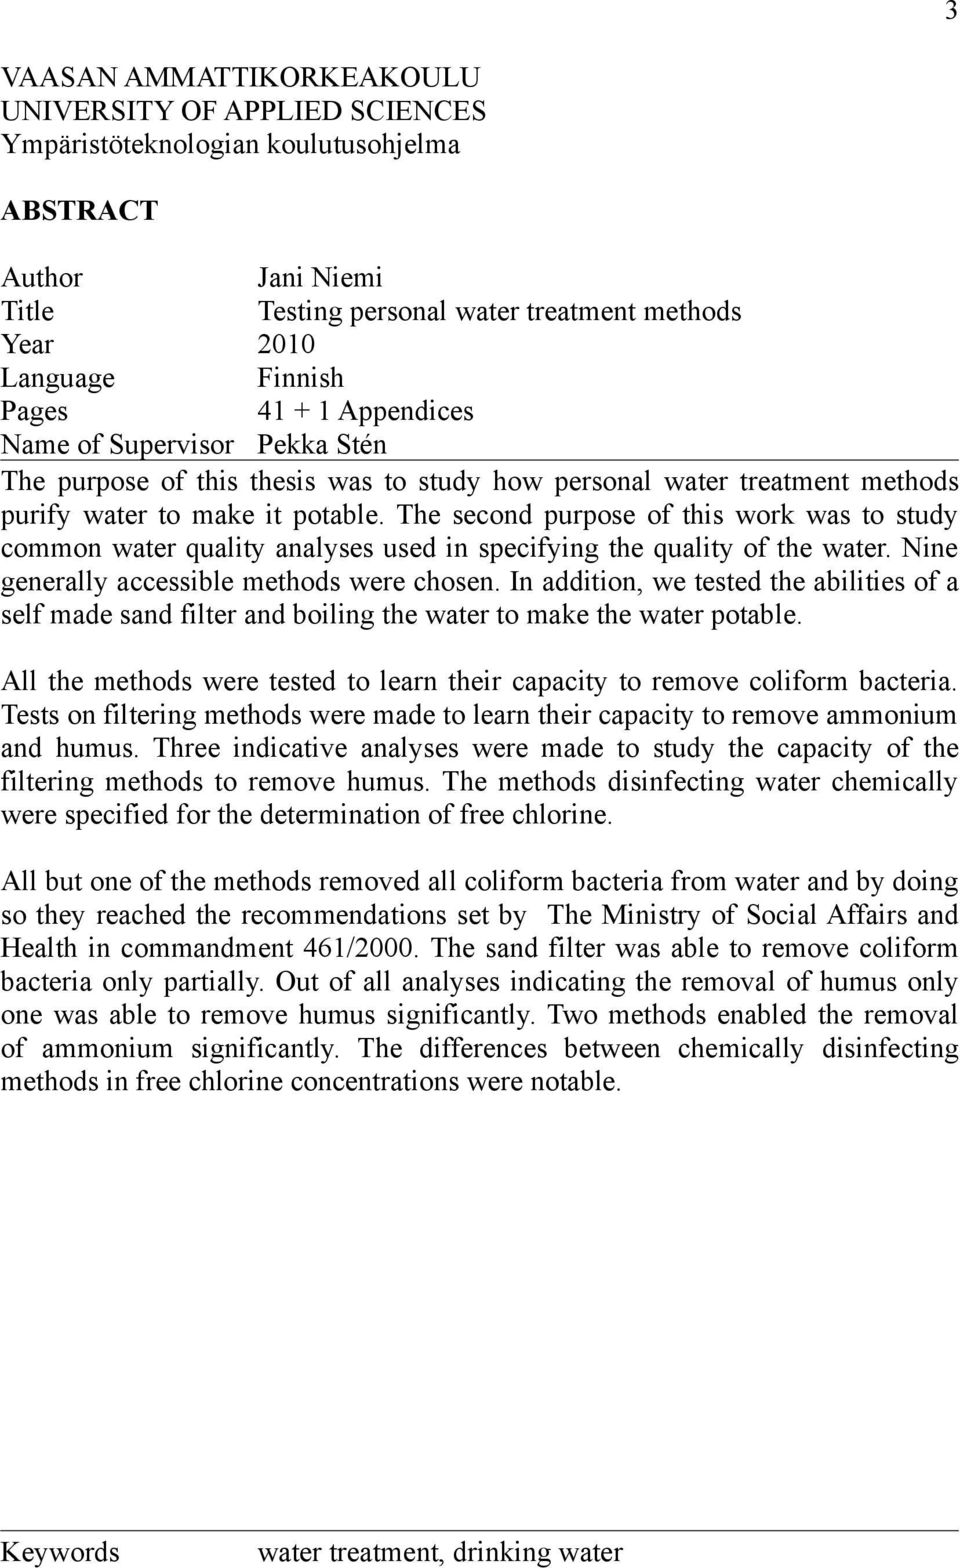 The second purpose of this work was to study common water quality analyses used in specifying the quality of the water. Nine generally accessible methods were chosen.